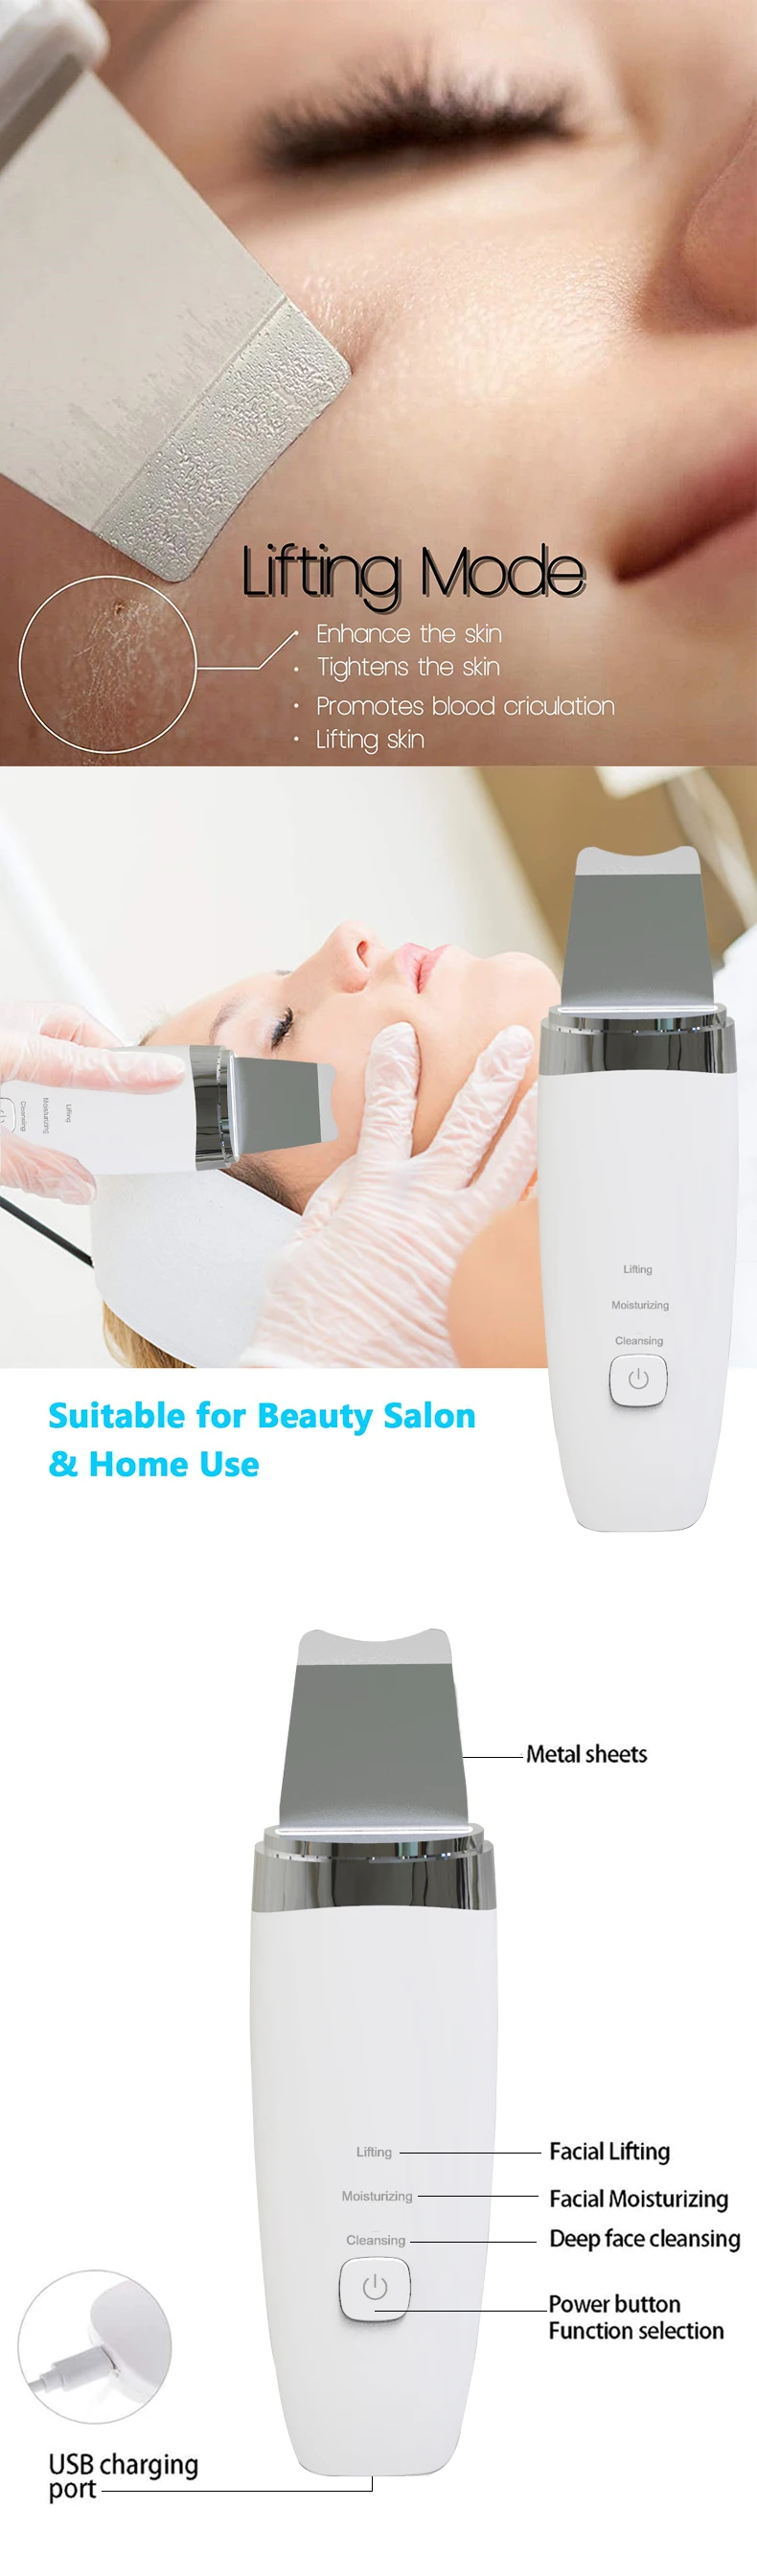 Multifunction  Cleaning Scrubber Facial Exfoliating ultrasonic skin scrubber